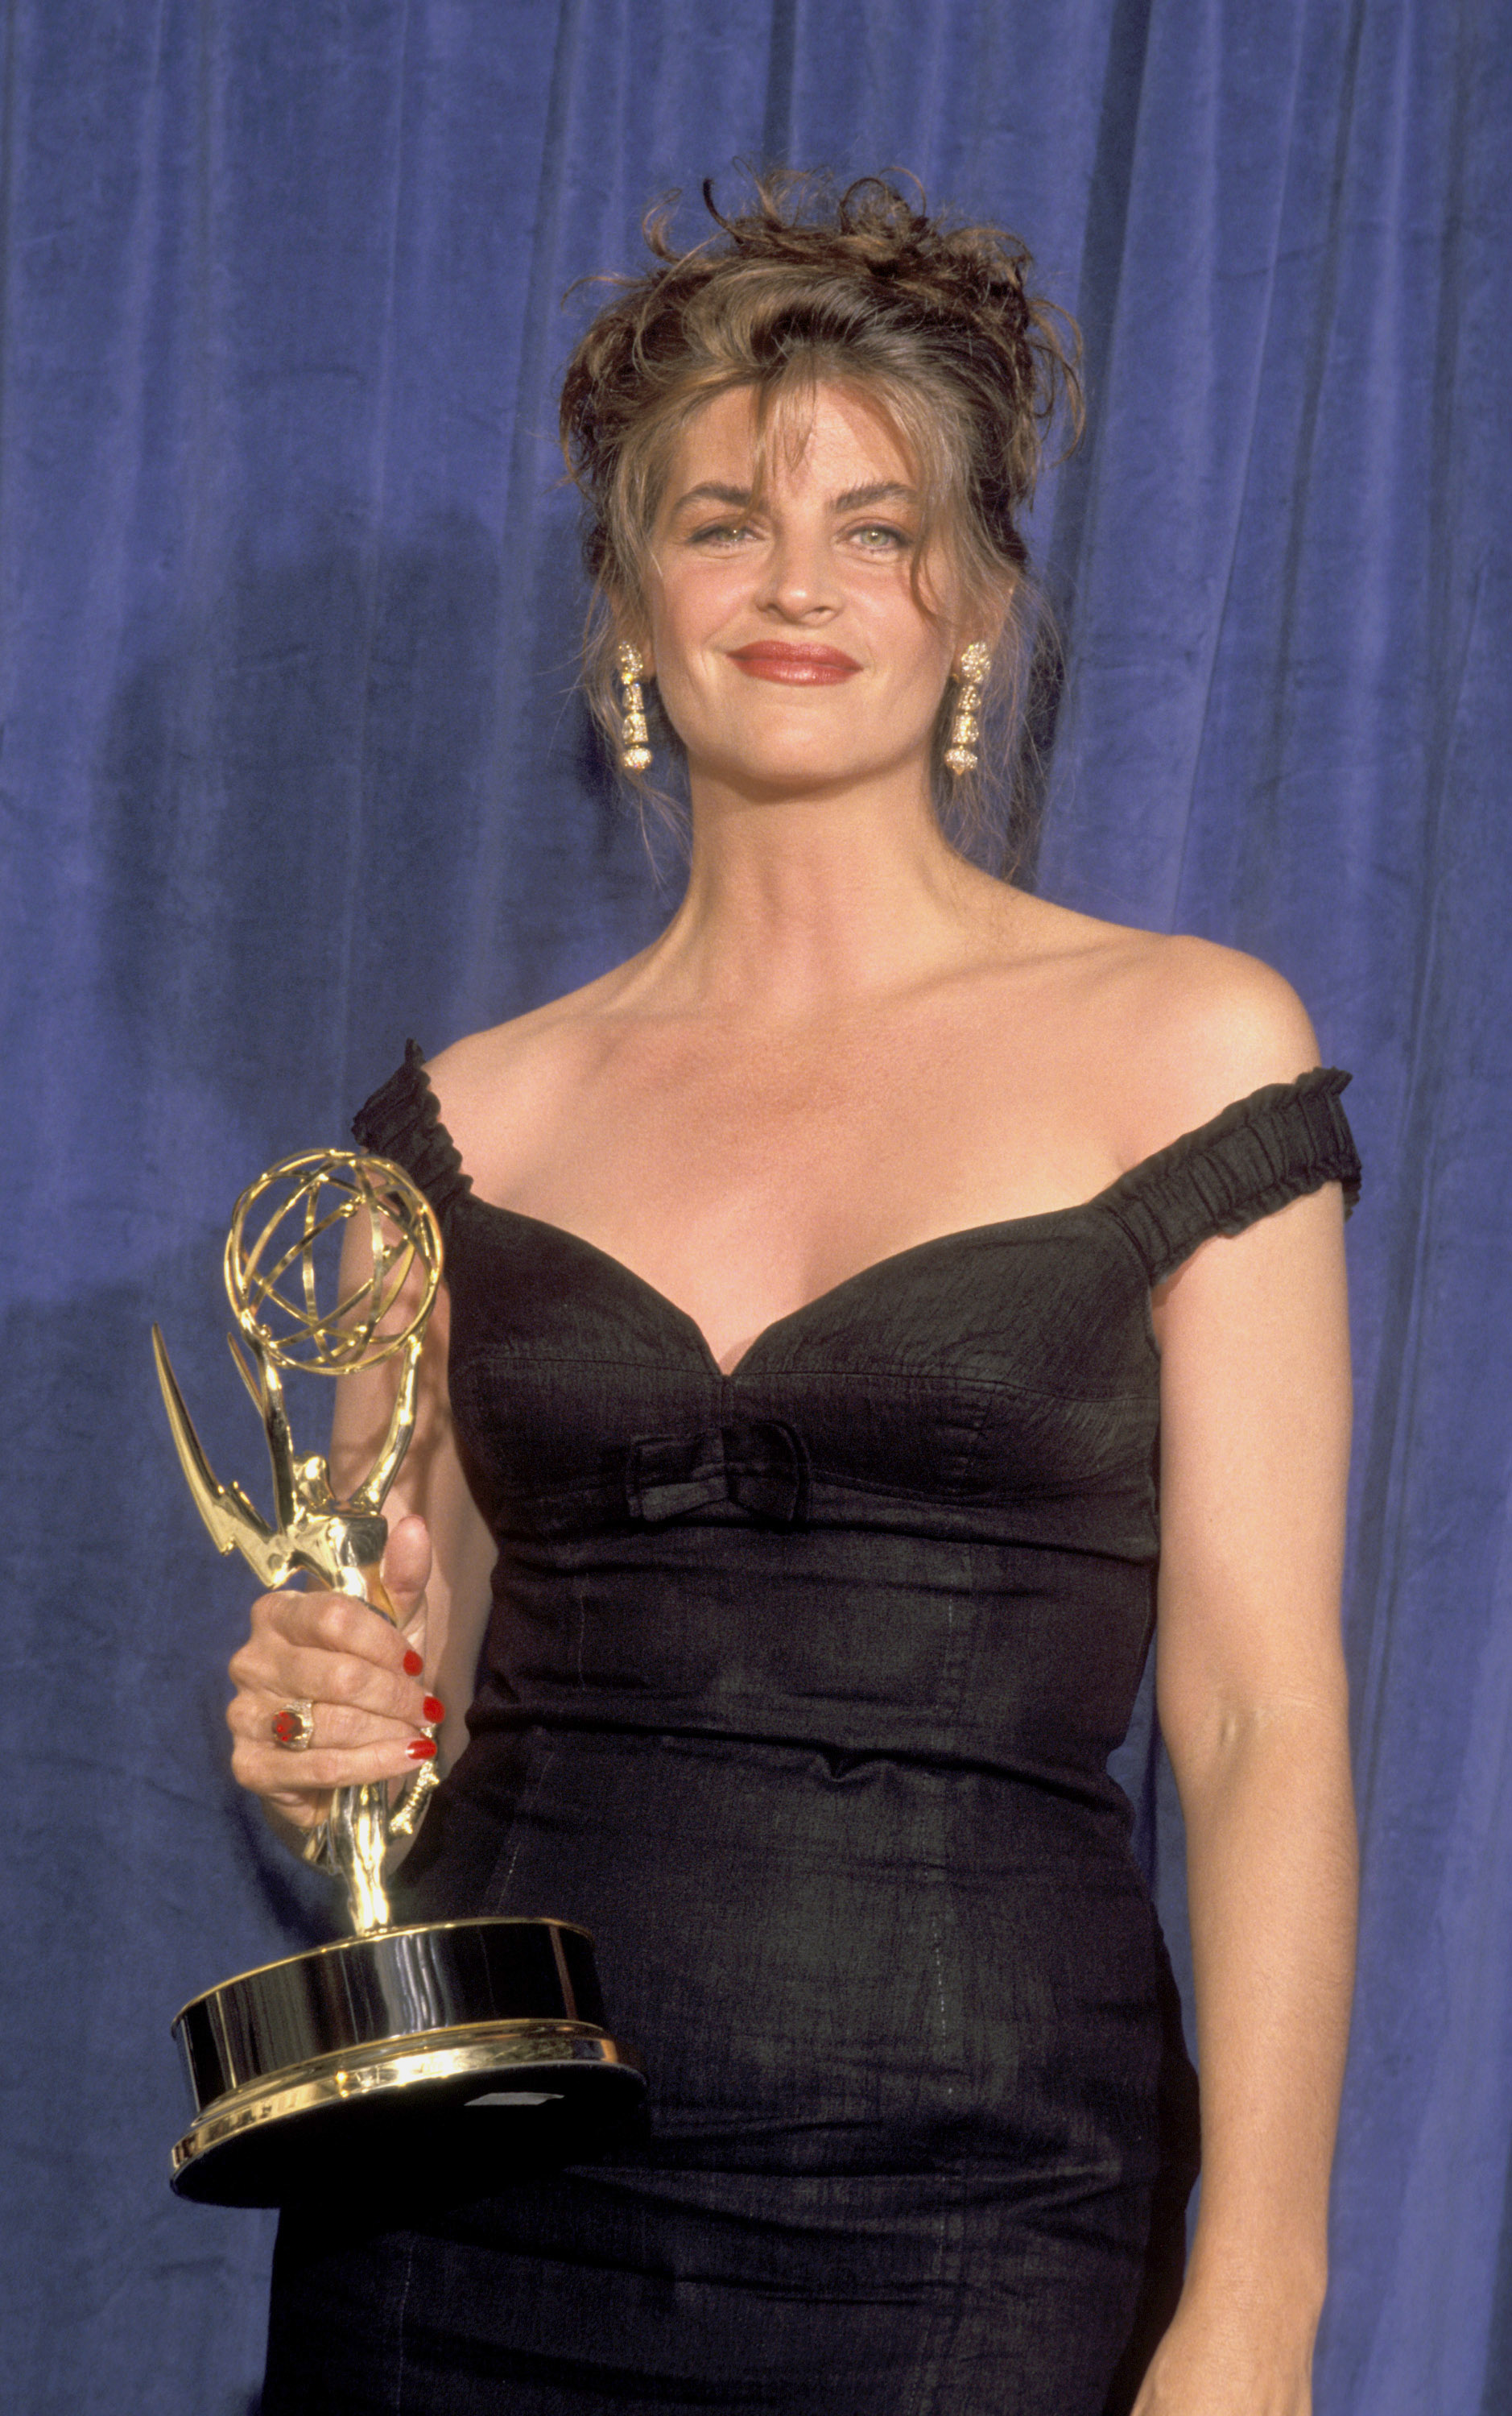 Kirstie Alley at the 43rd Annual Primetime Emmy Awards in New York City on April 25, 1991 | Source: Getty Images